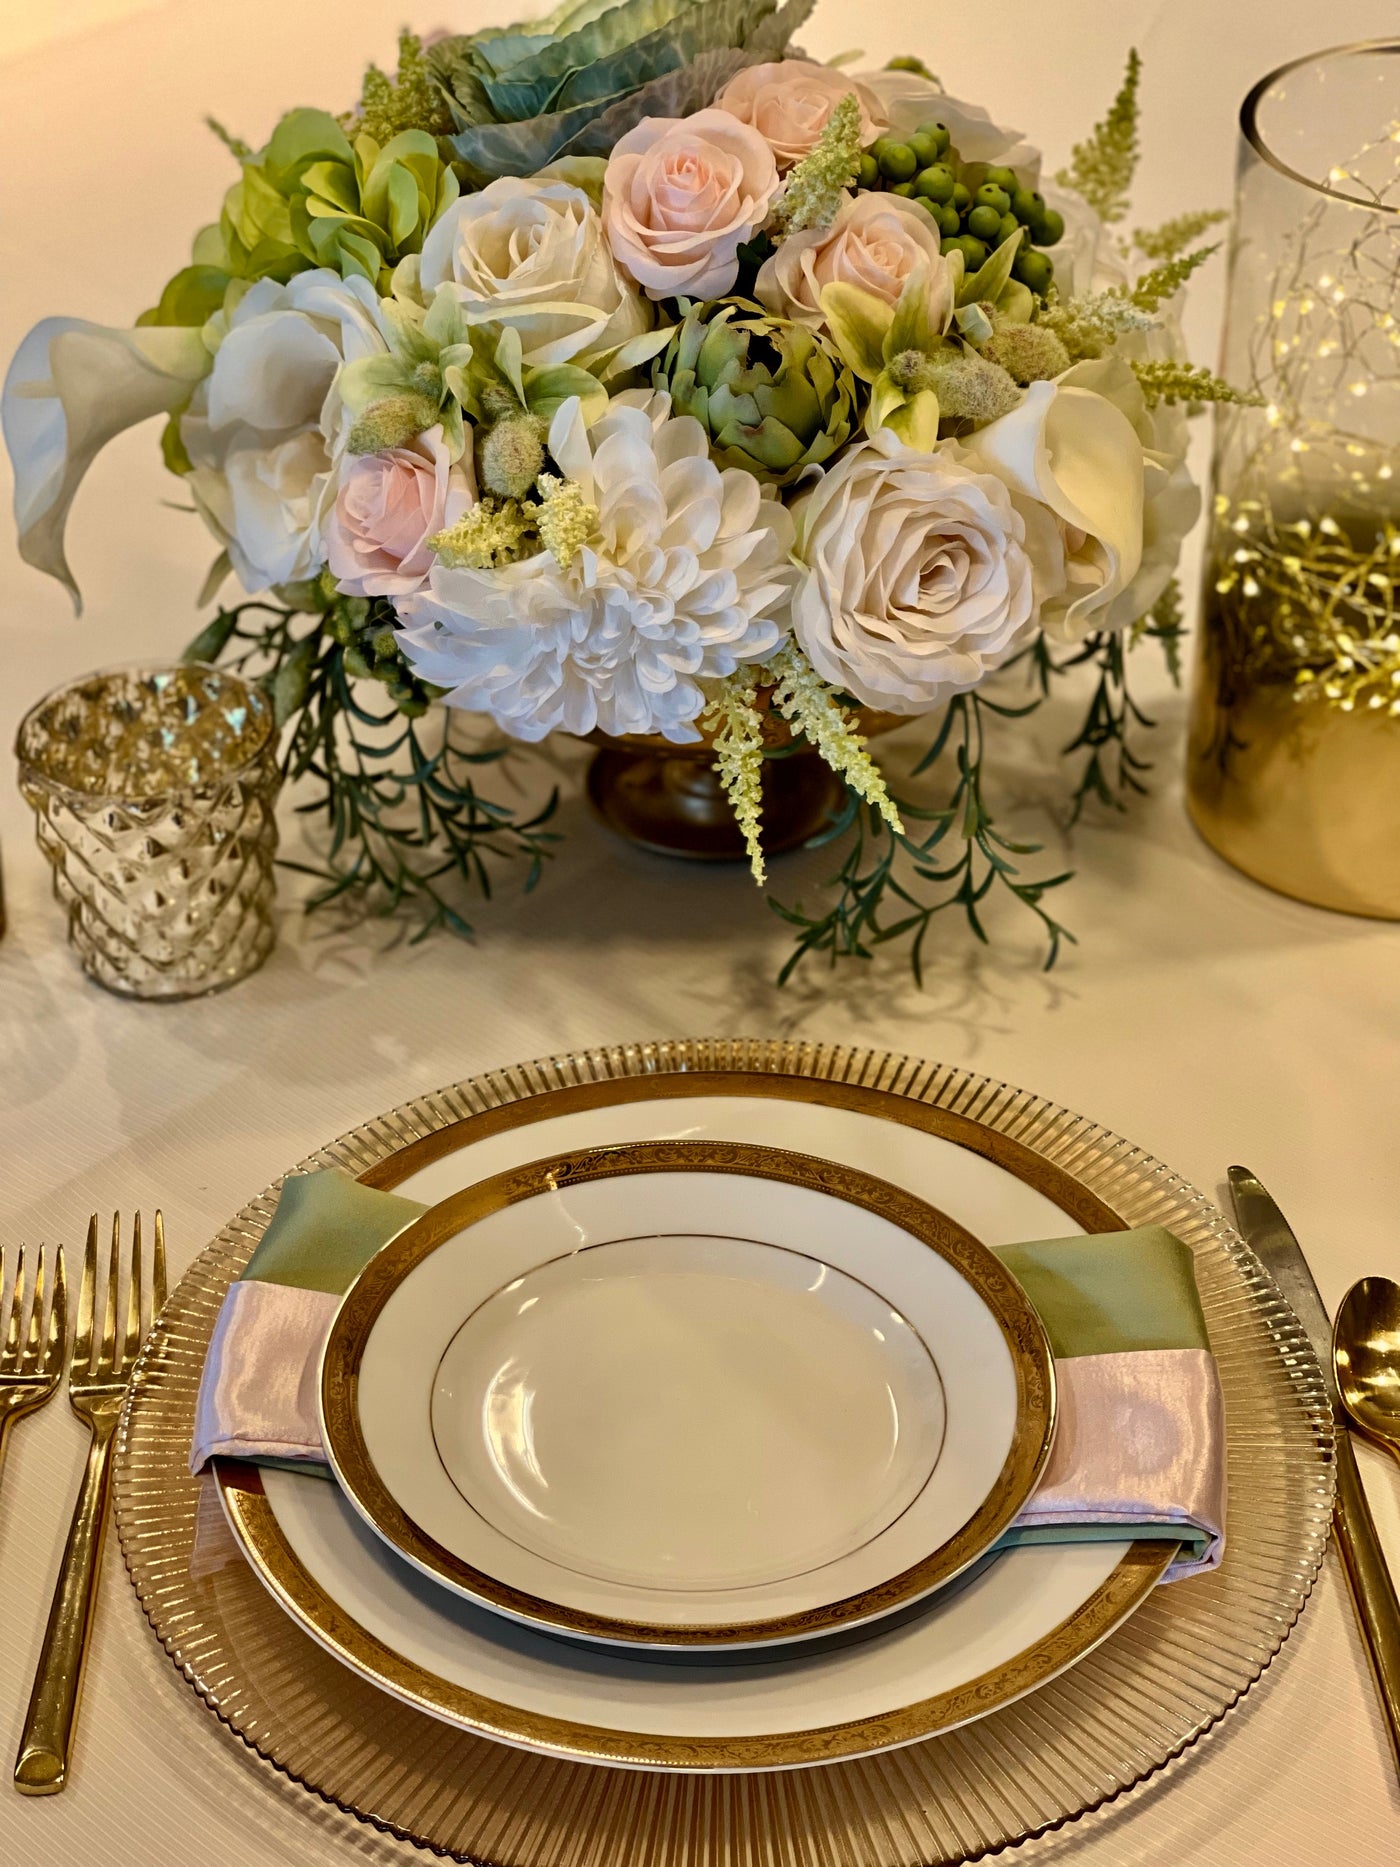 This gorgeous centrepiece is a delicate symphony of white and cream roses and huge pom pom dahlias interspersed with chartreuse hydrangea, orchid buds and green hypericum berries